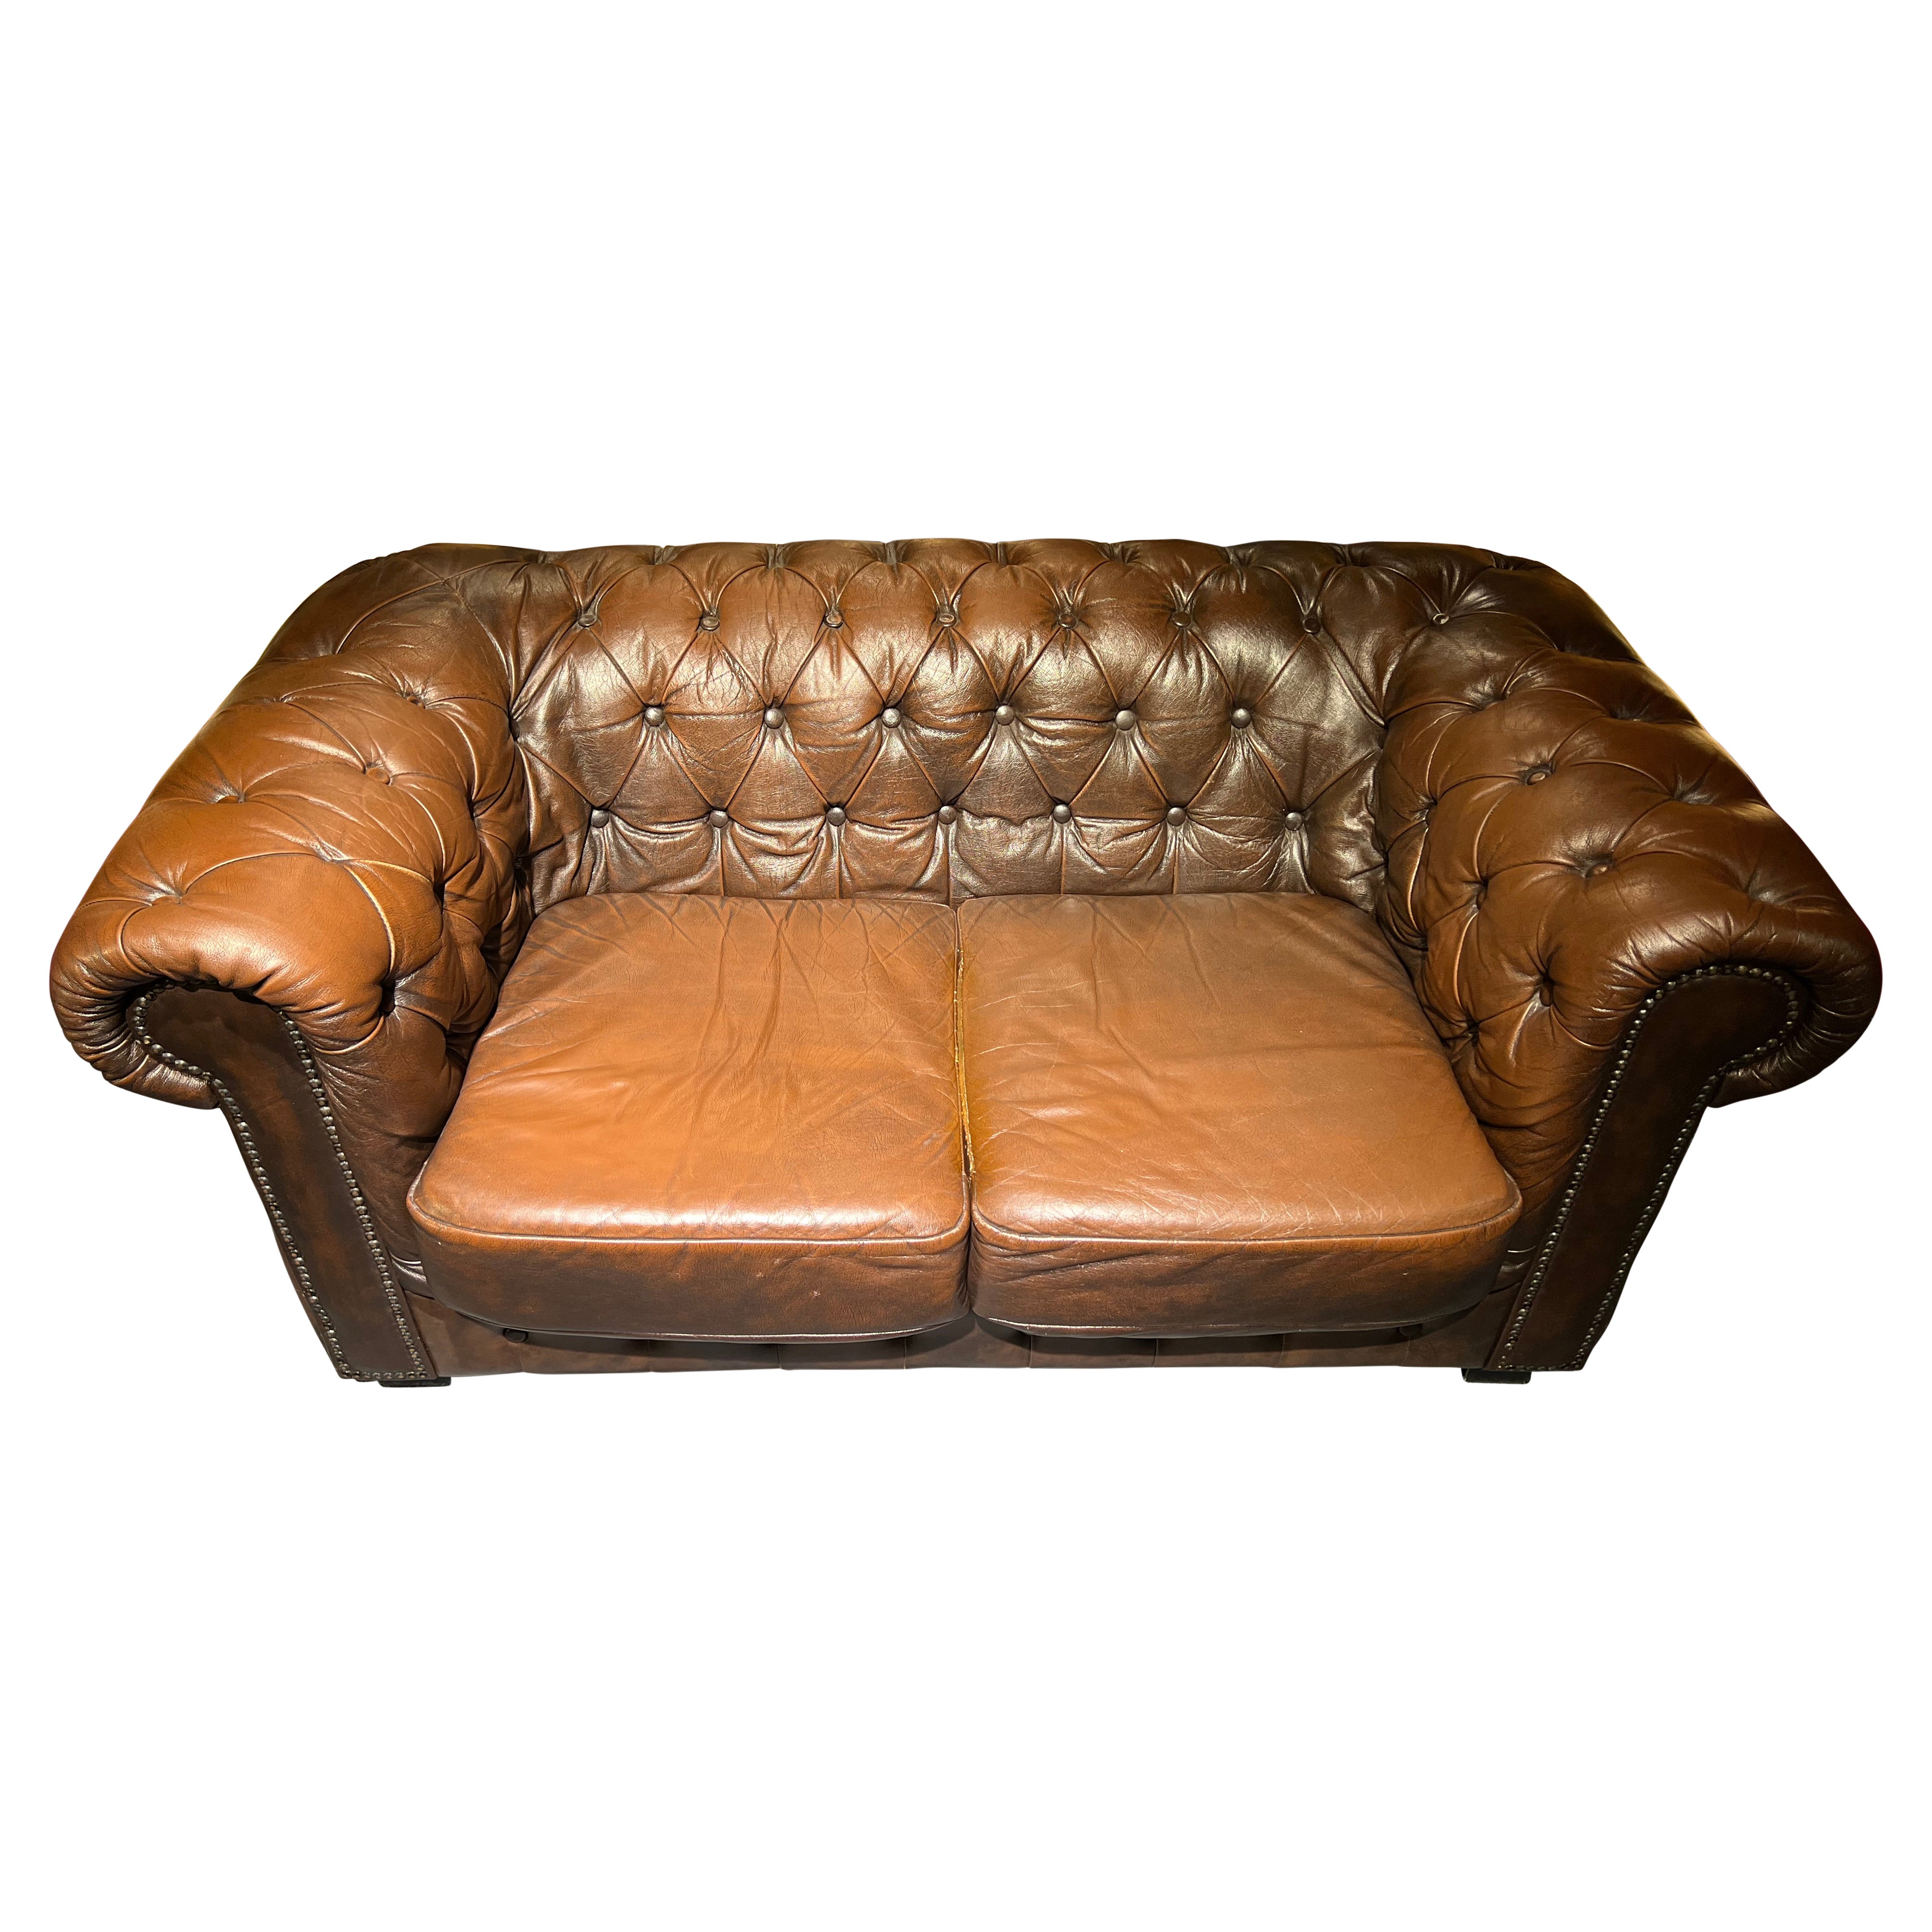 Original Chesterfield Vintage Brown Chesterfield Two-Seater Sofa